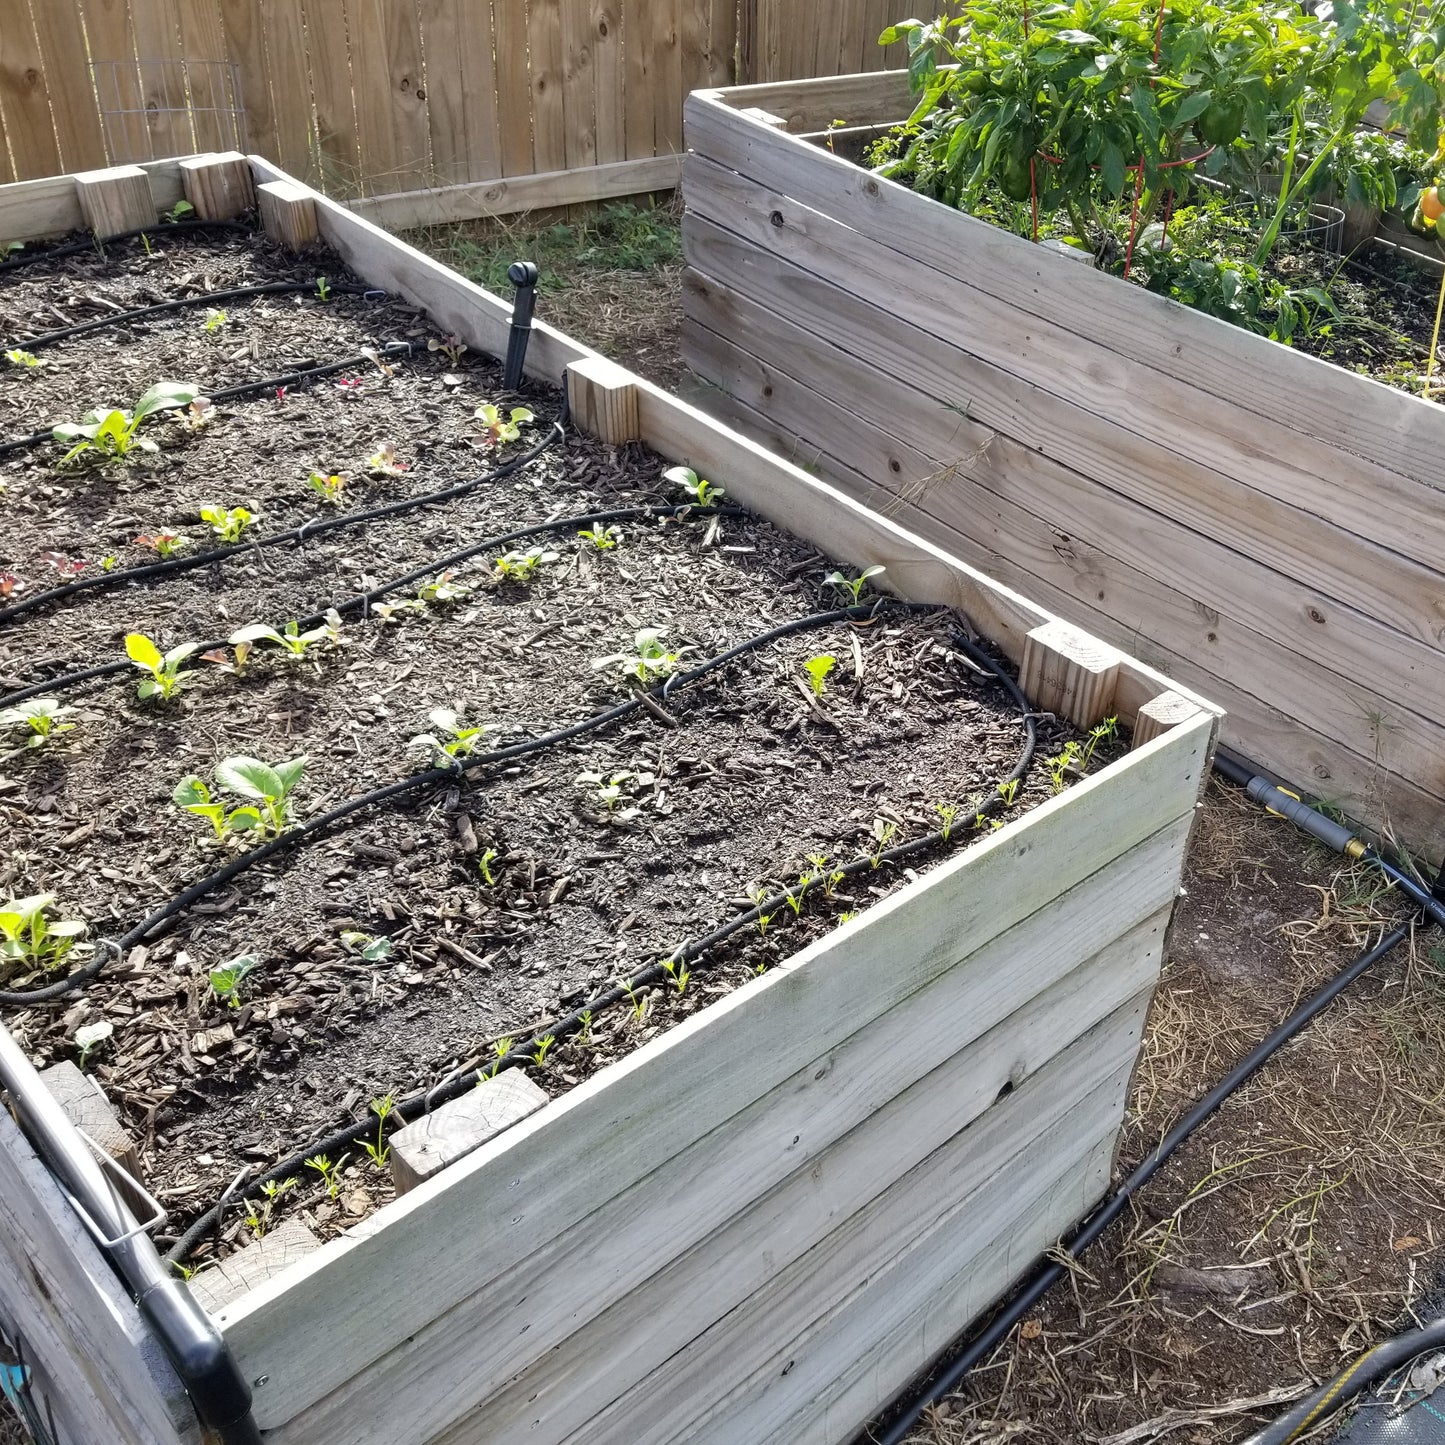 We build these wood raised garden beds for you.